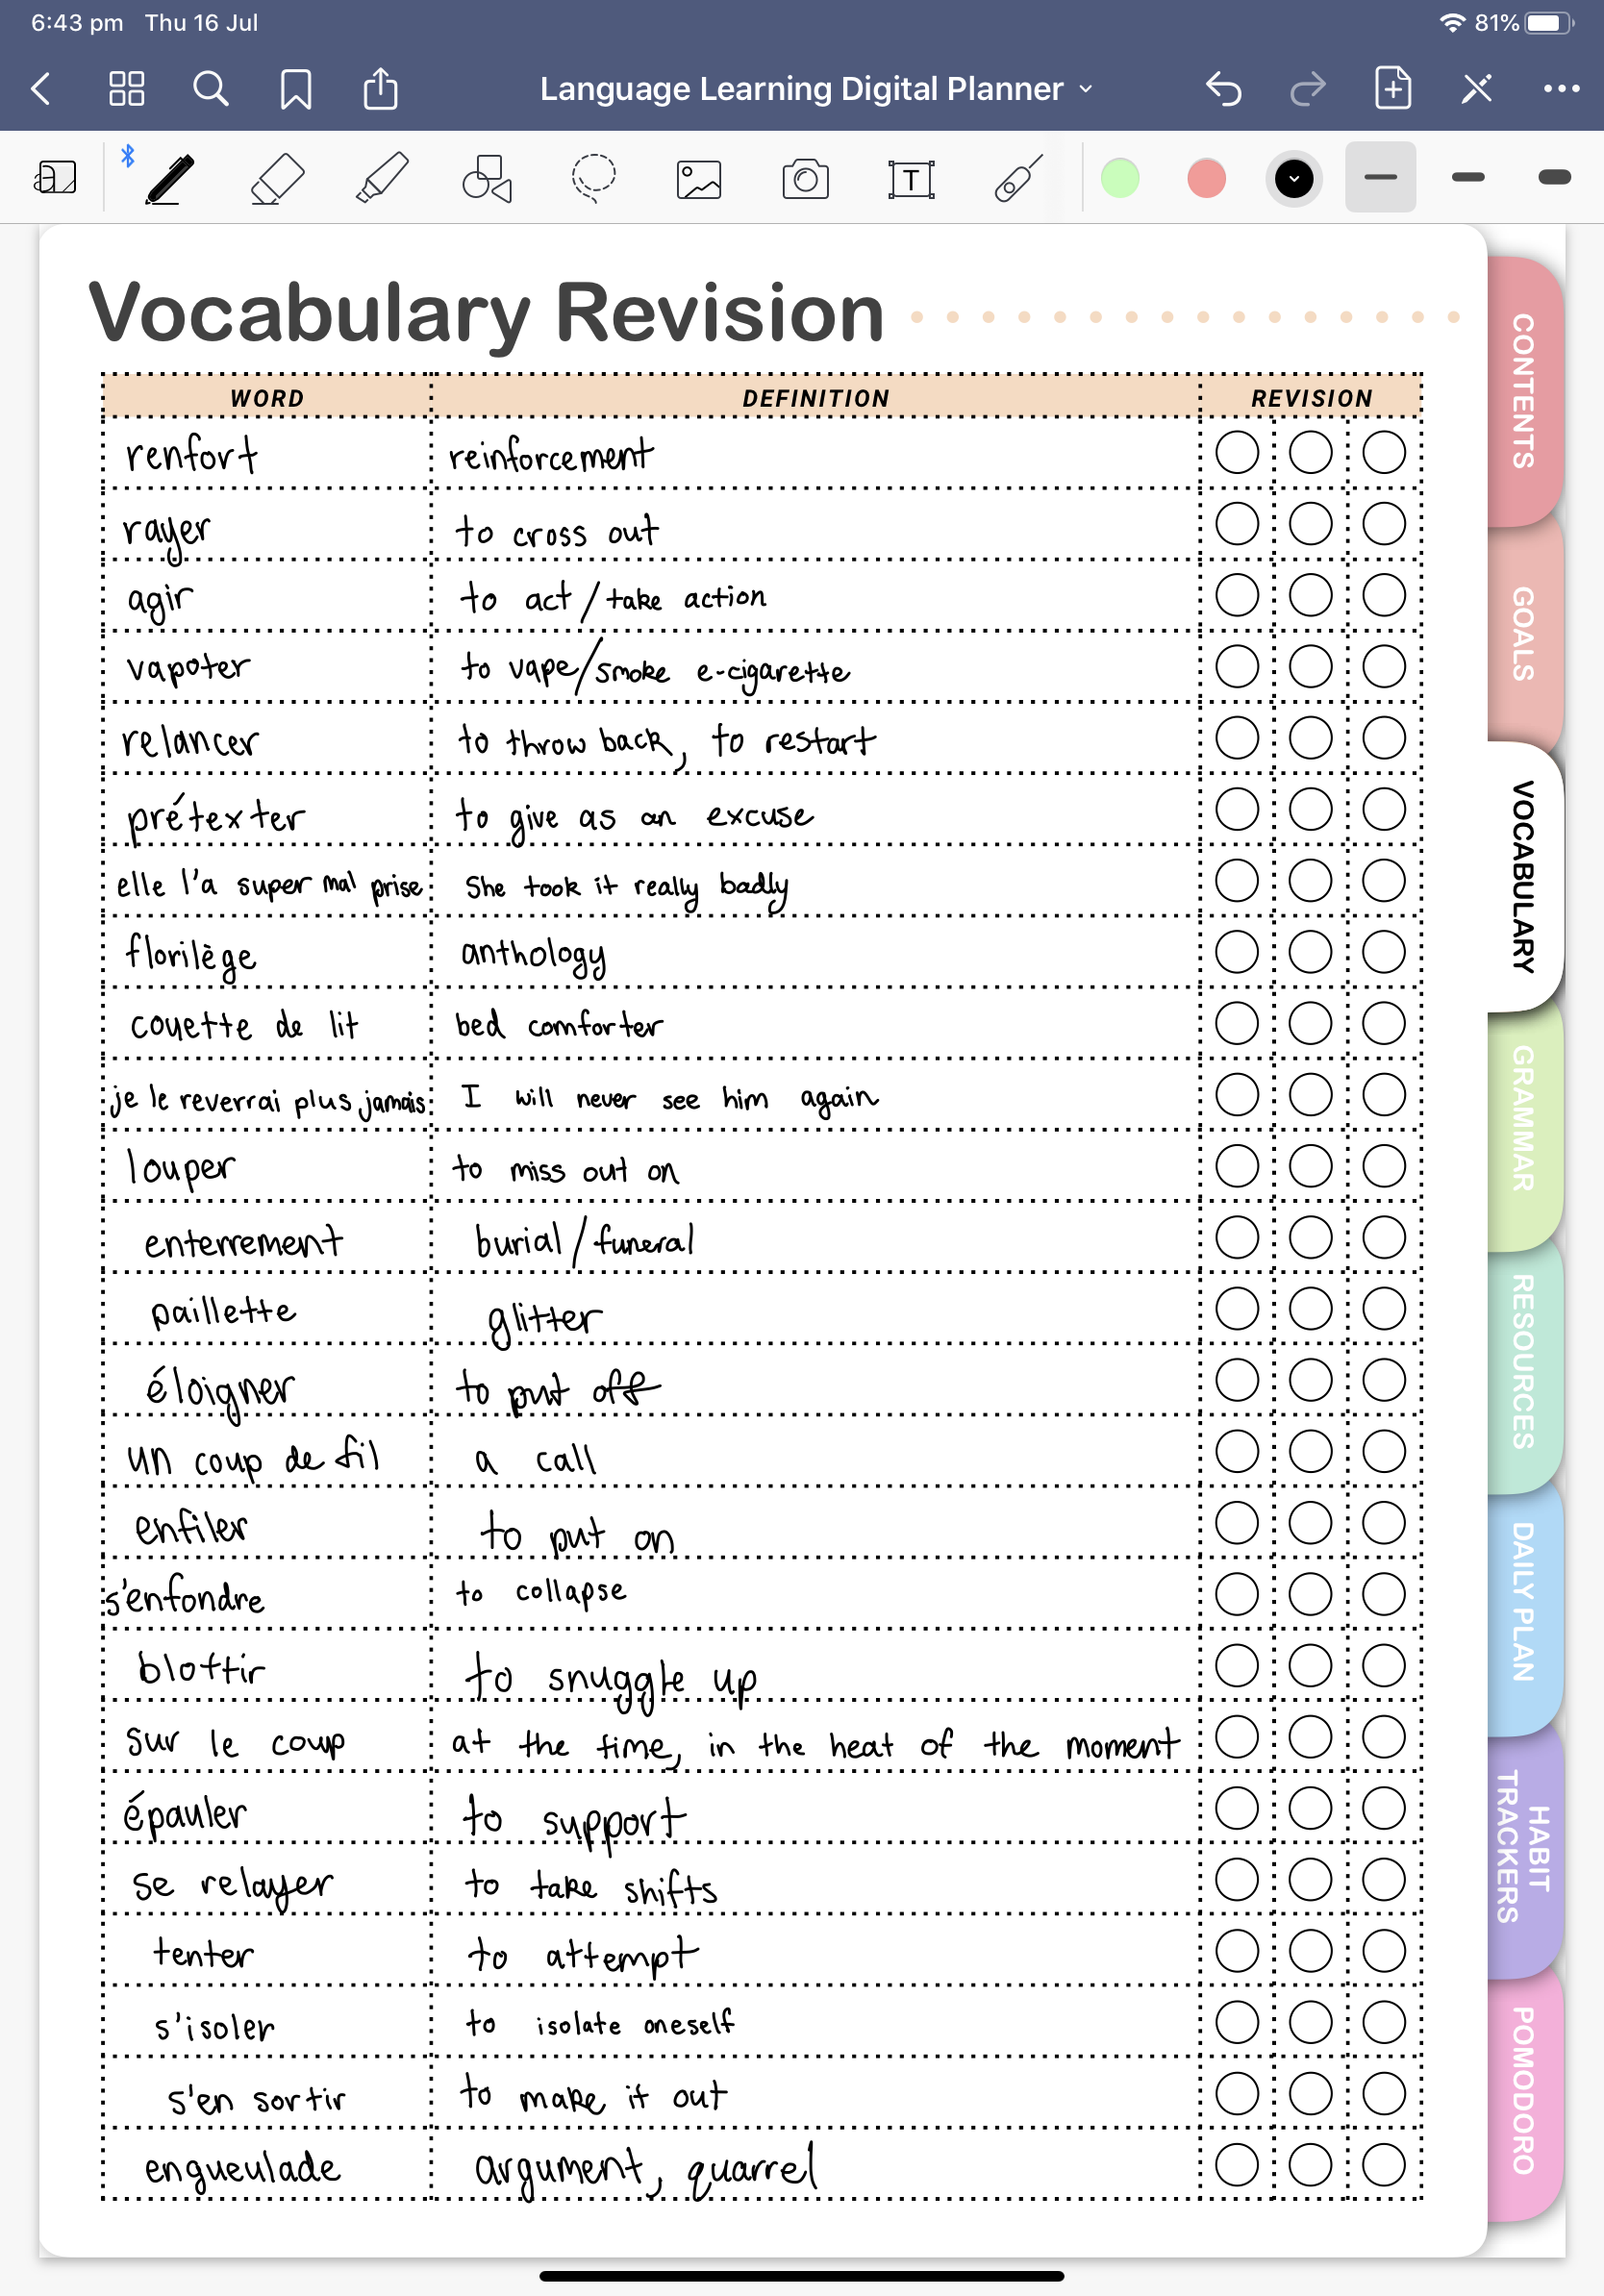 How to Organize a Foreign Language Notebook in 9 Simple Tips